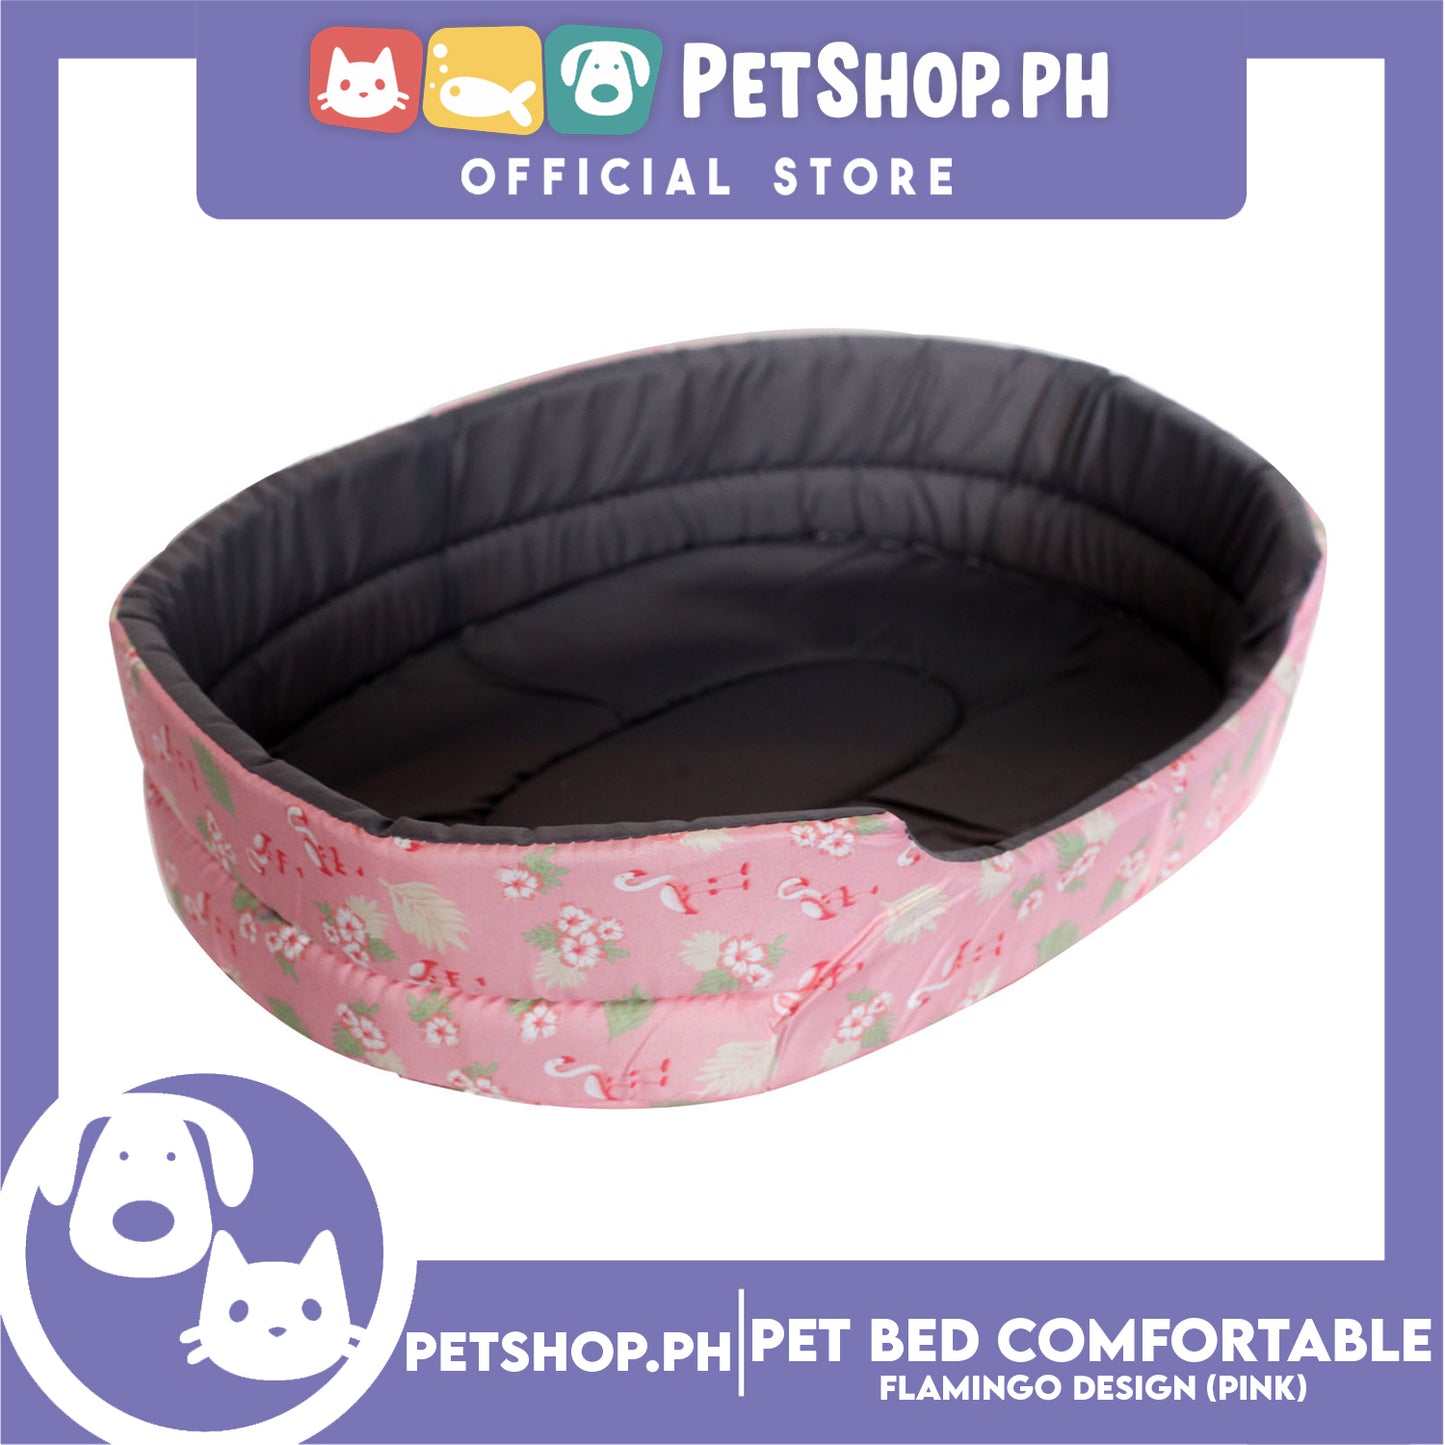 Pet Bed Comfortable Sleeping Bed with Flamingo Design 55x42x13cm for Dogs & Cats Pink